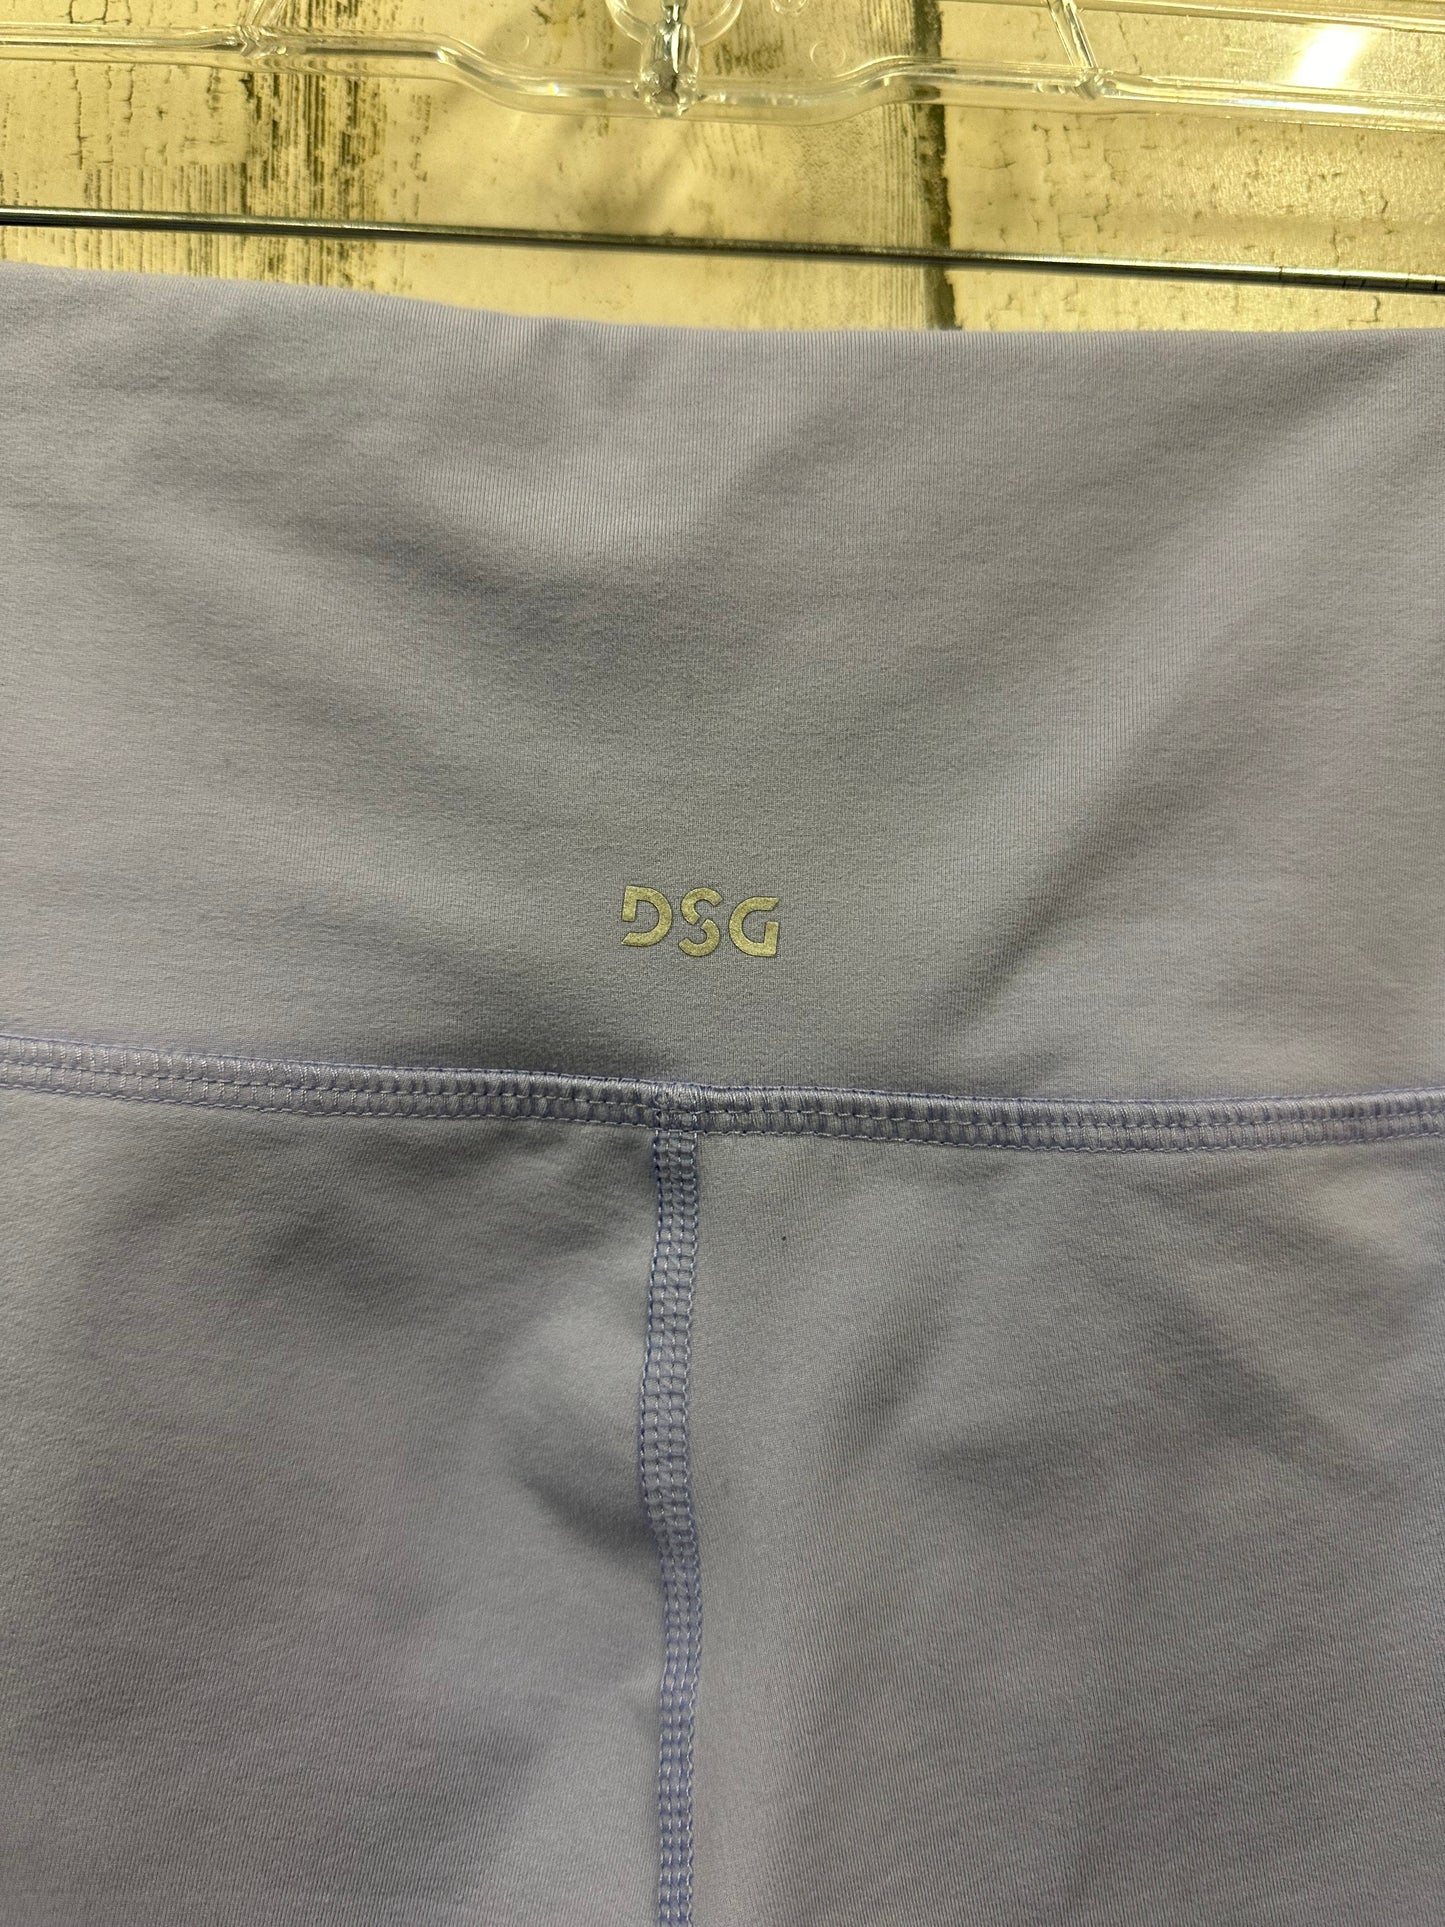 Athletic Leggings By Dsg Outerwear  Size: M